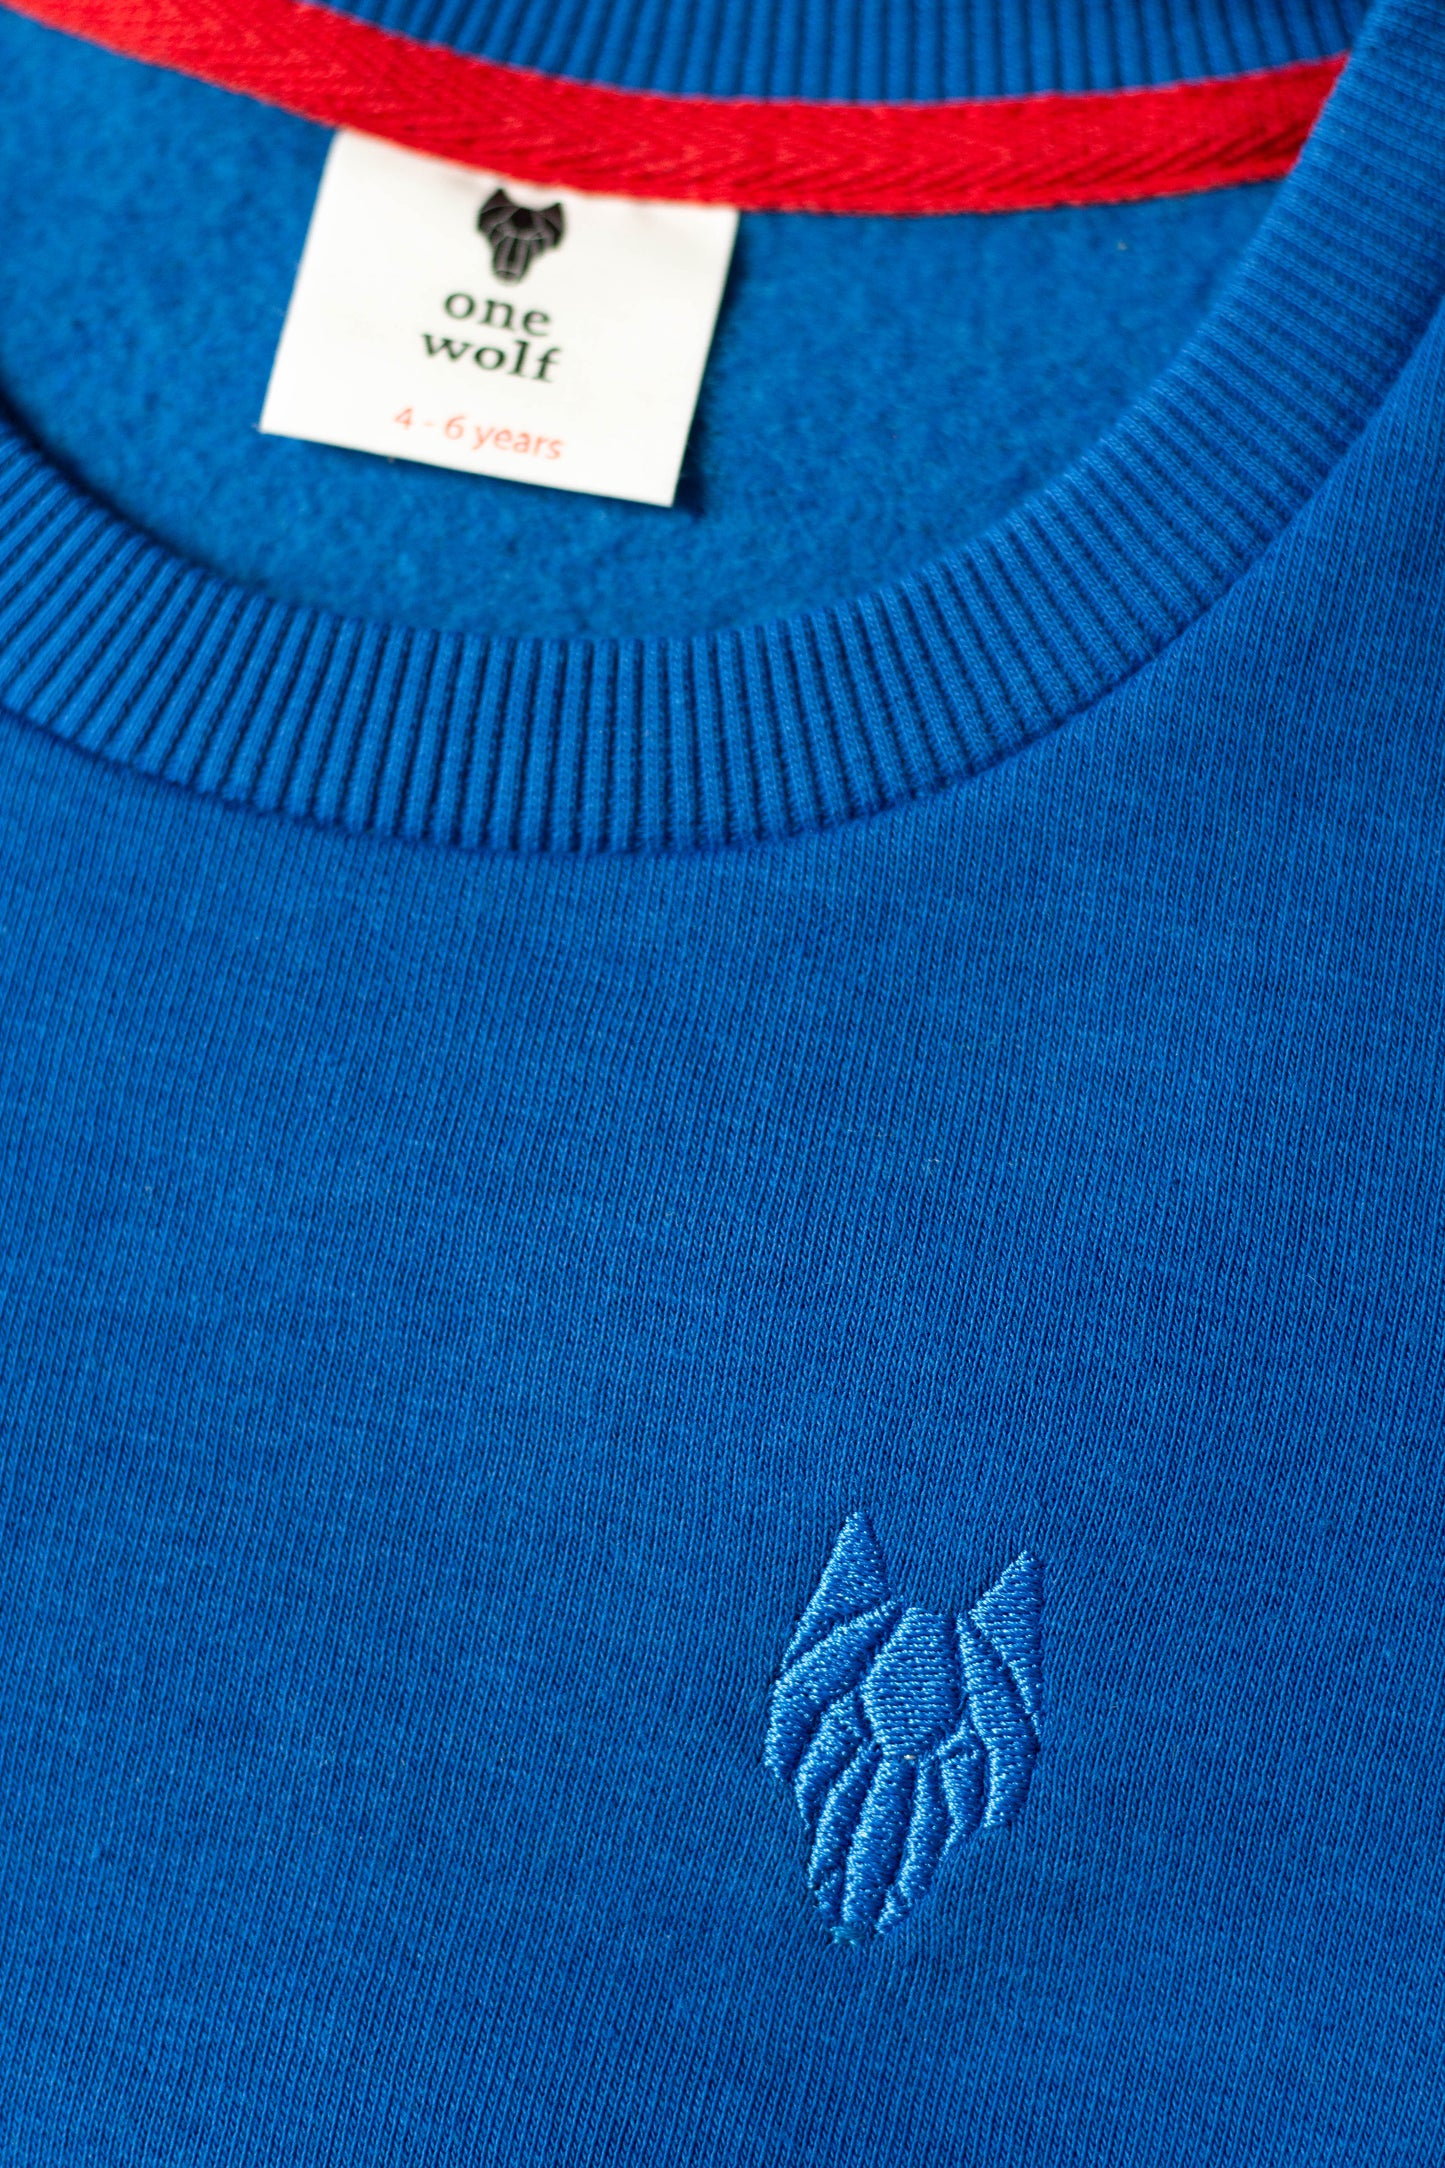 Kid’s One Wolf sweater, blue with blue logo